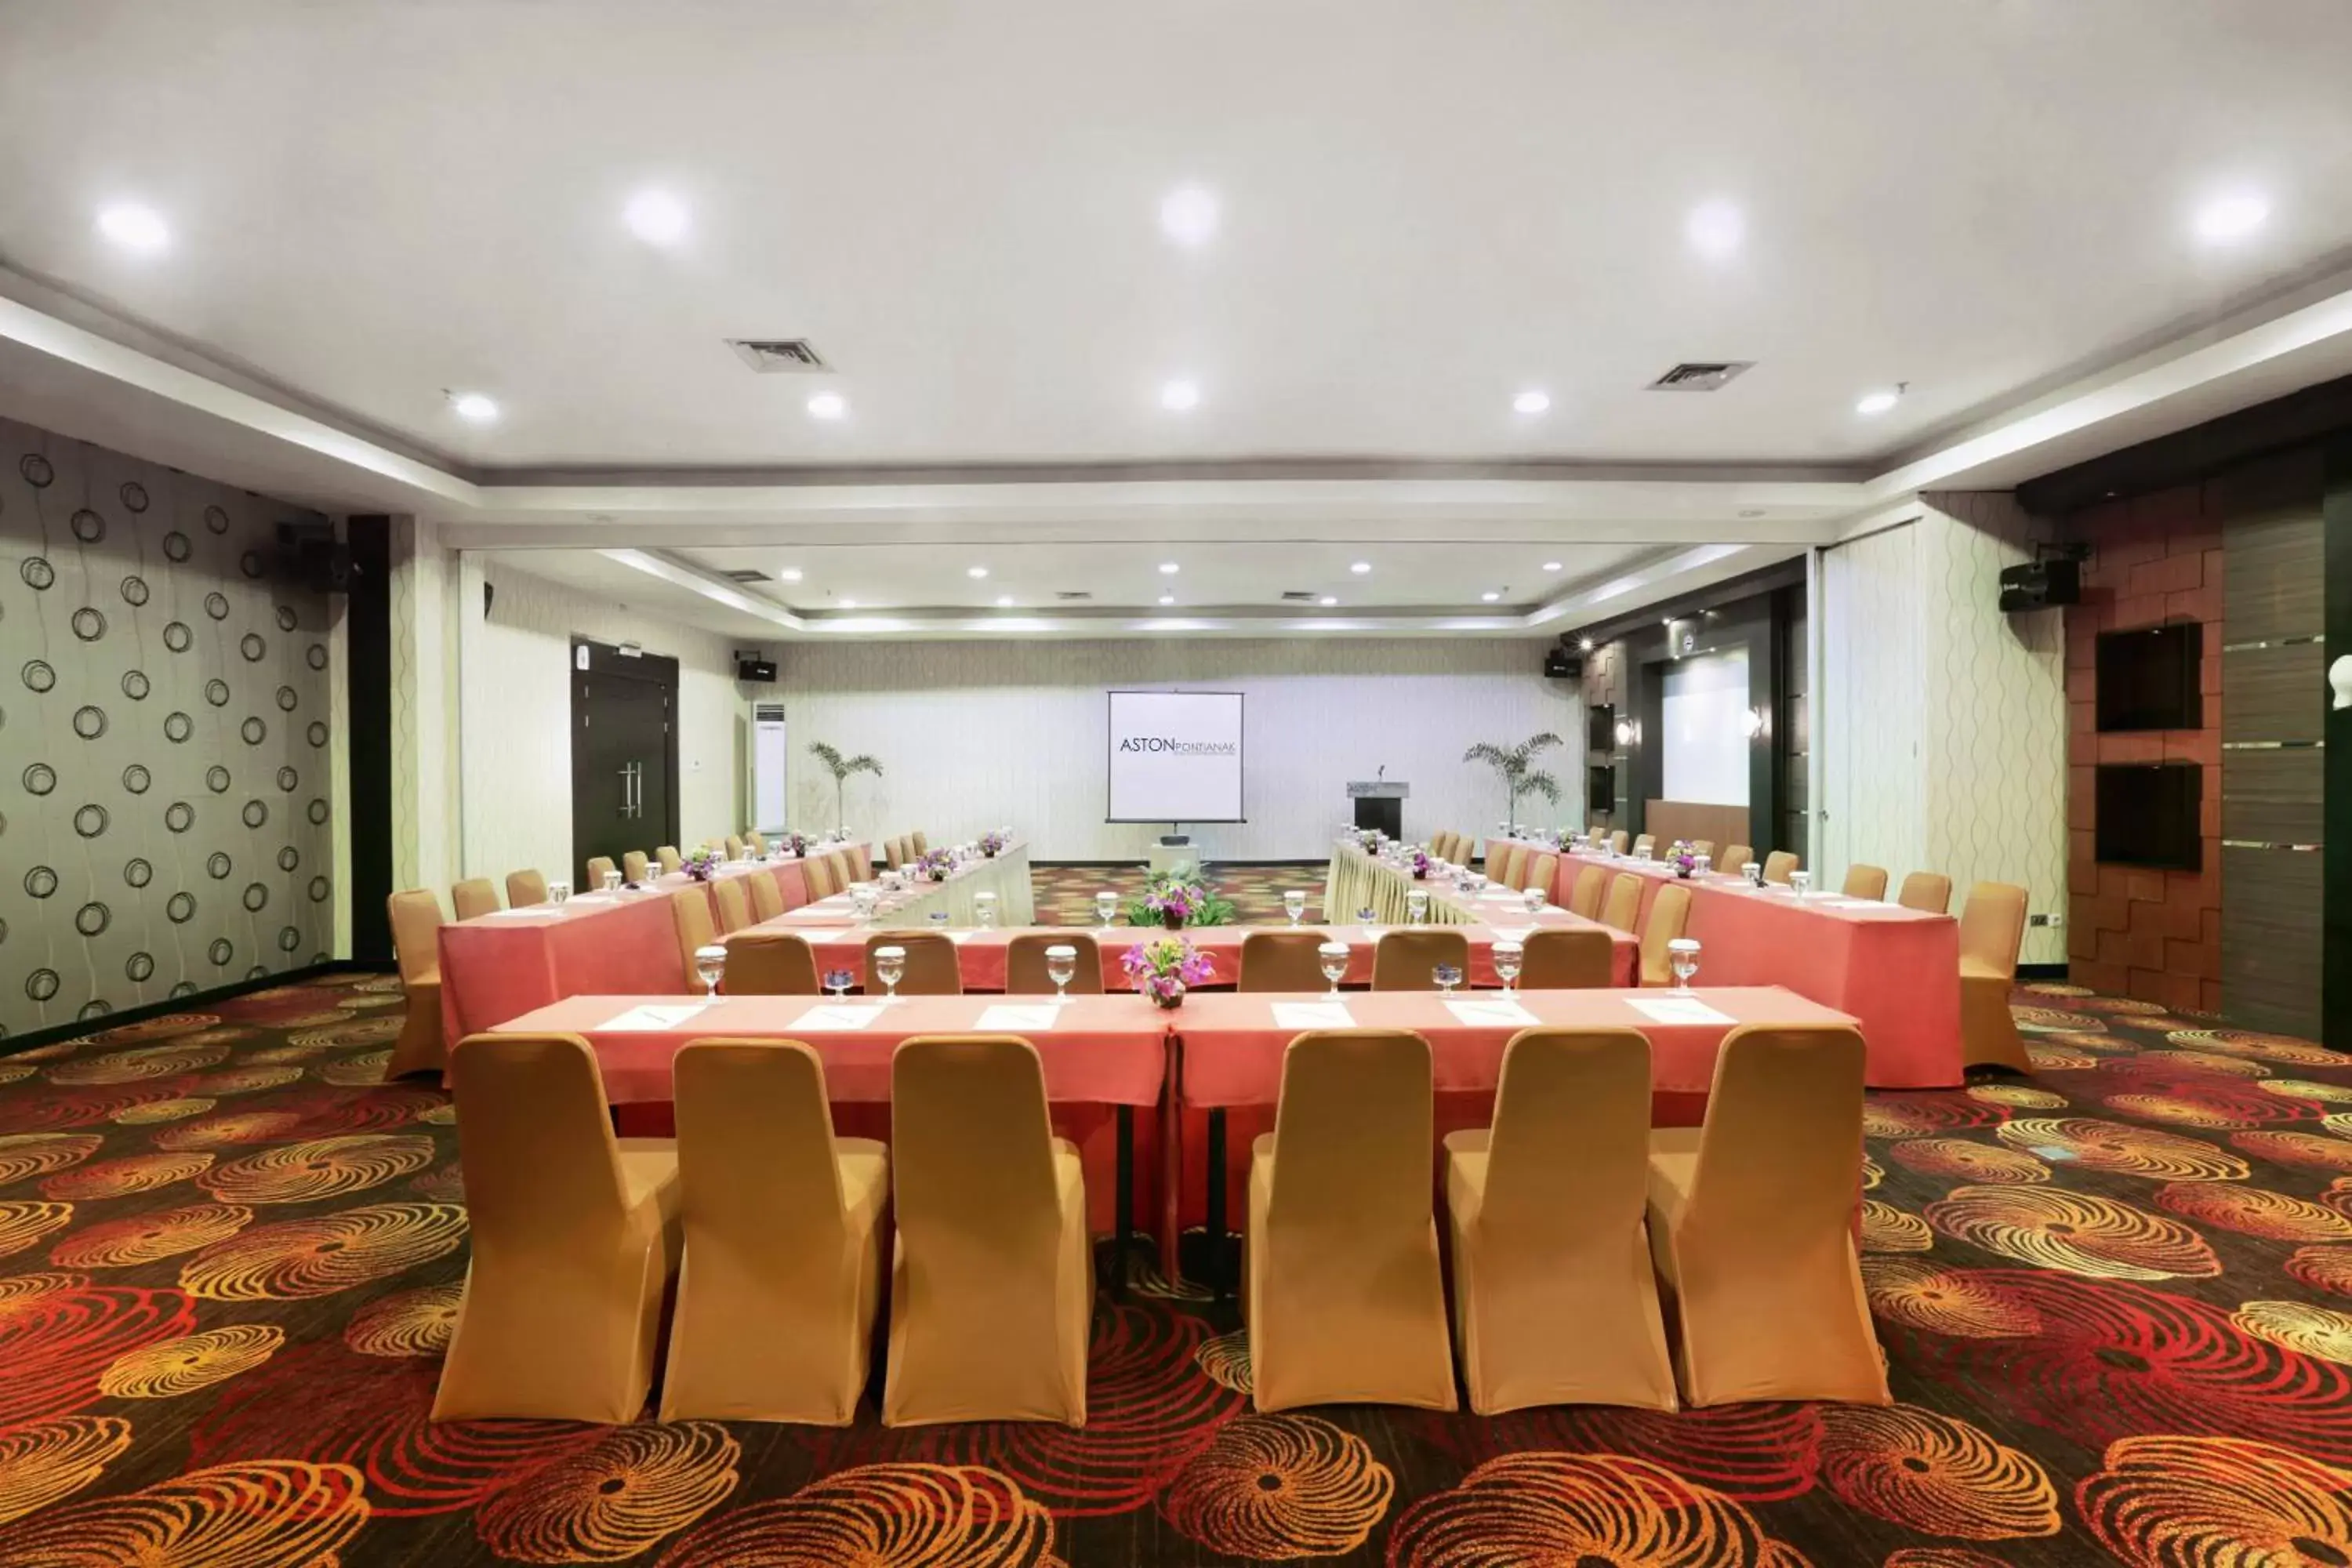 Meeting/conference room, Banquet Facilities in ASTON Pontianak Hotel and Convention Center